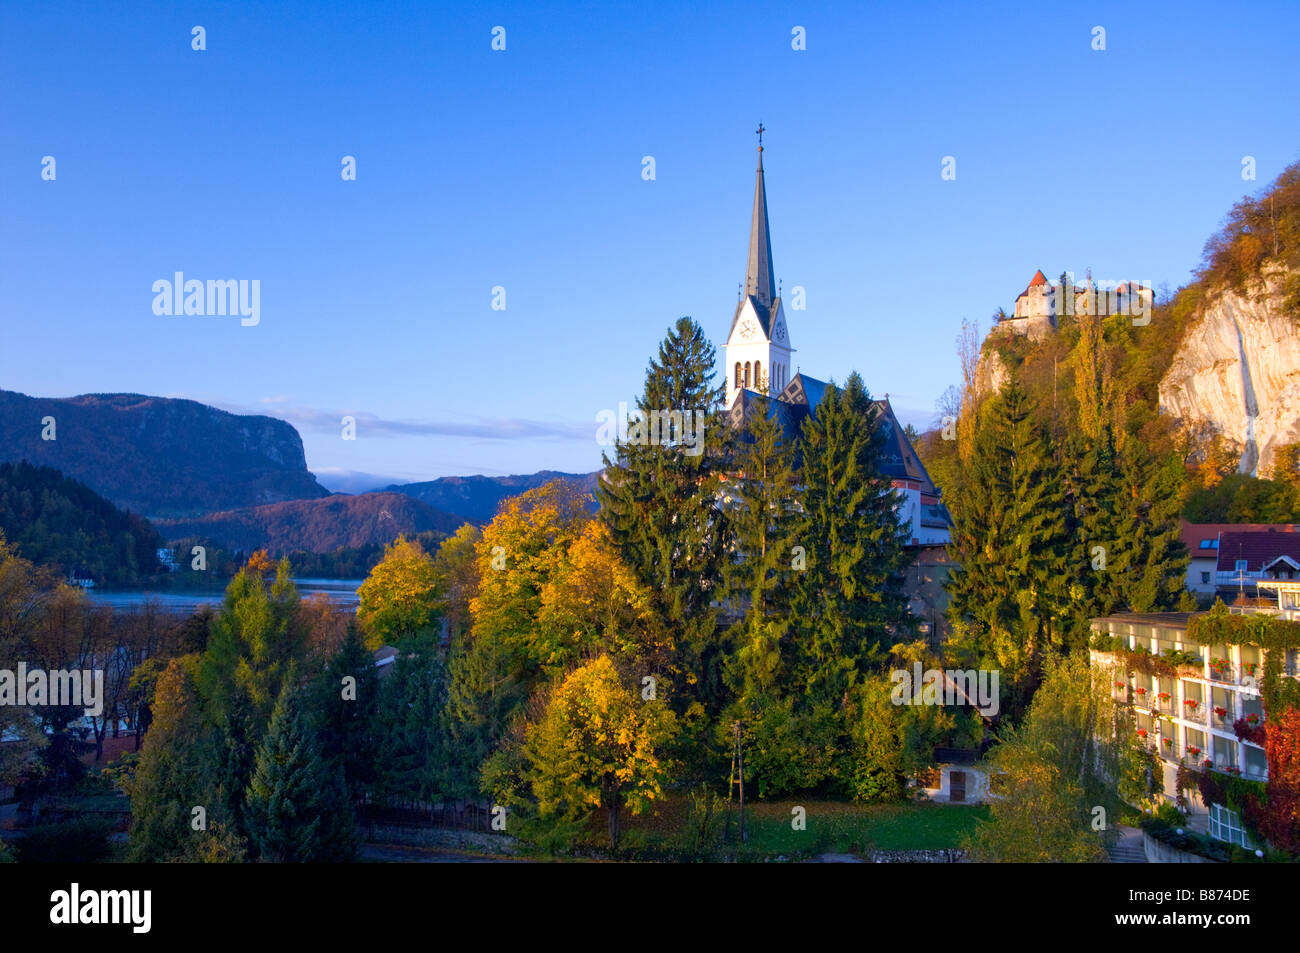 The St Martin s Parish Church and Castle at Bled slovenia Stock Photo